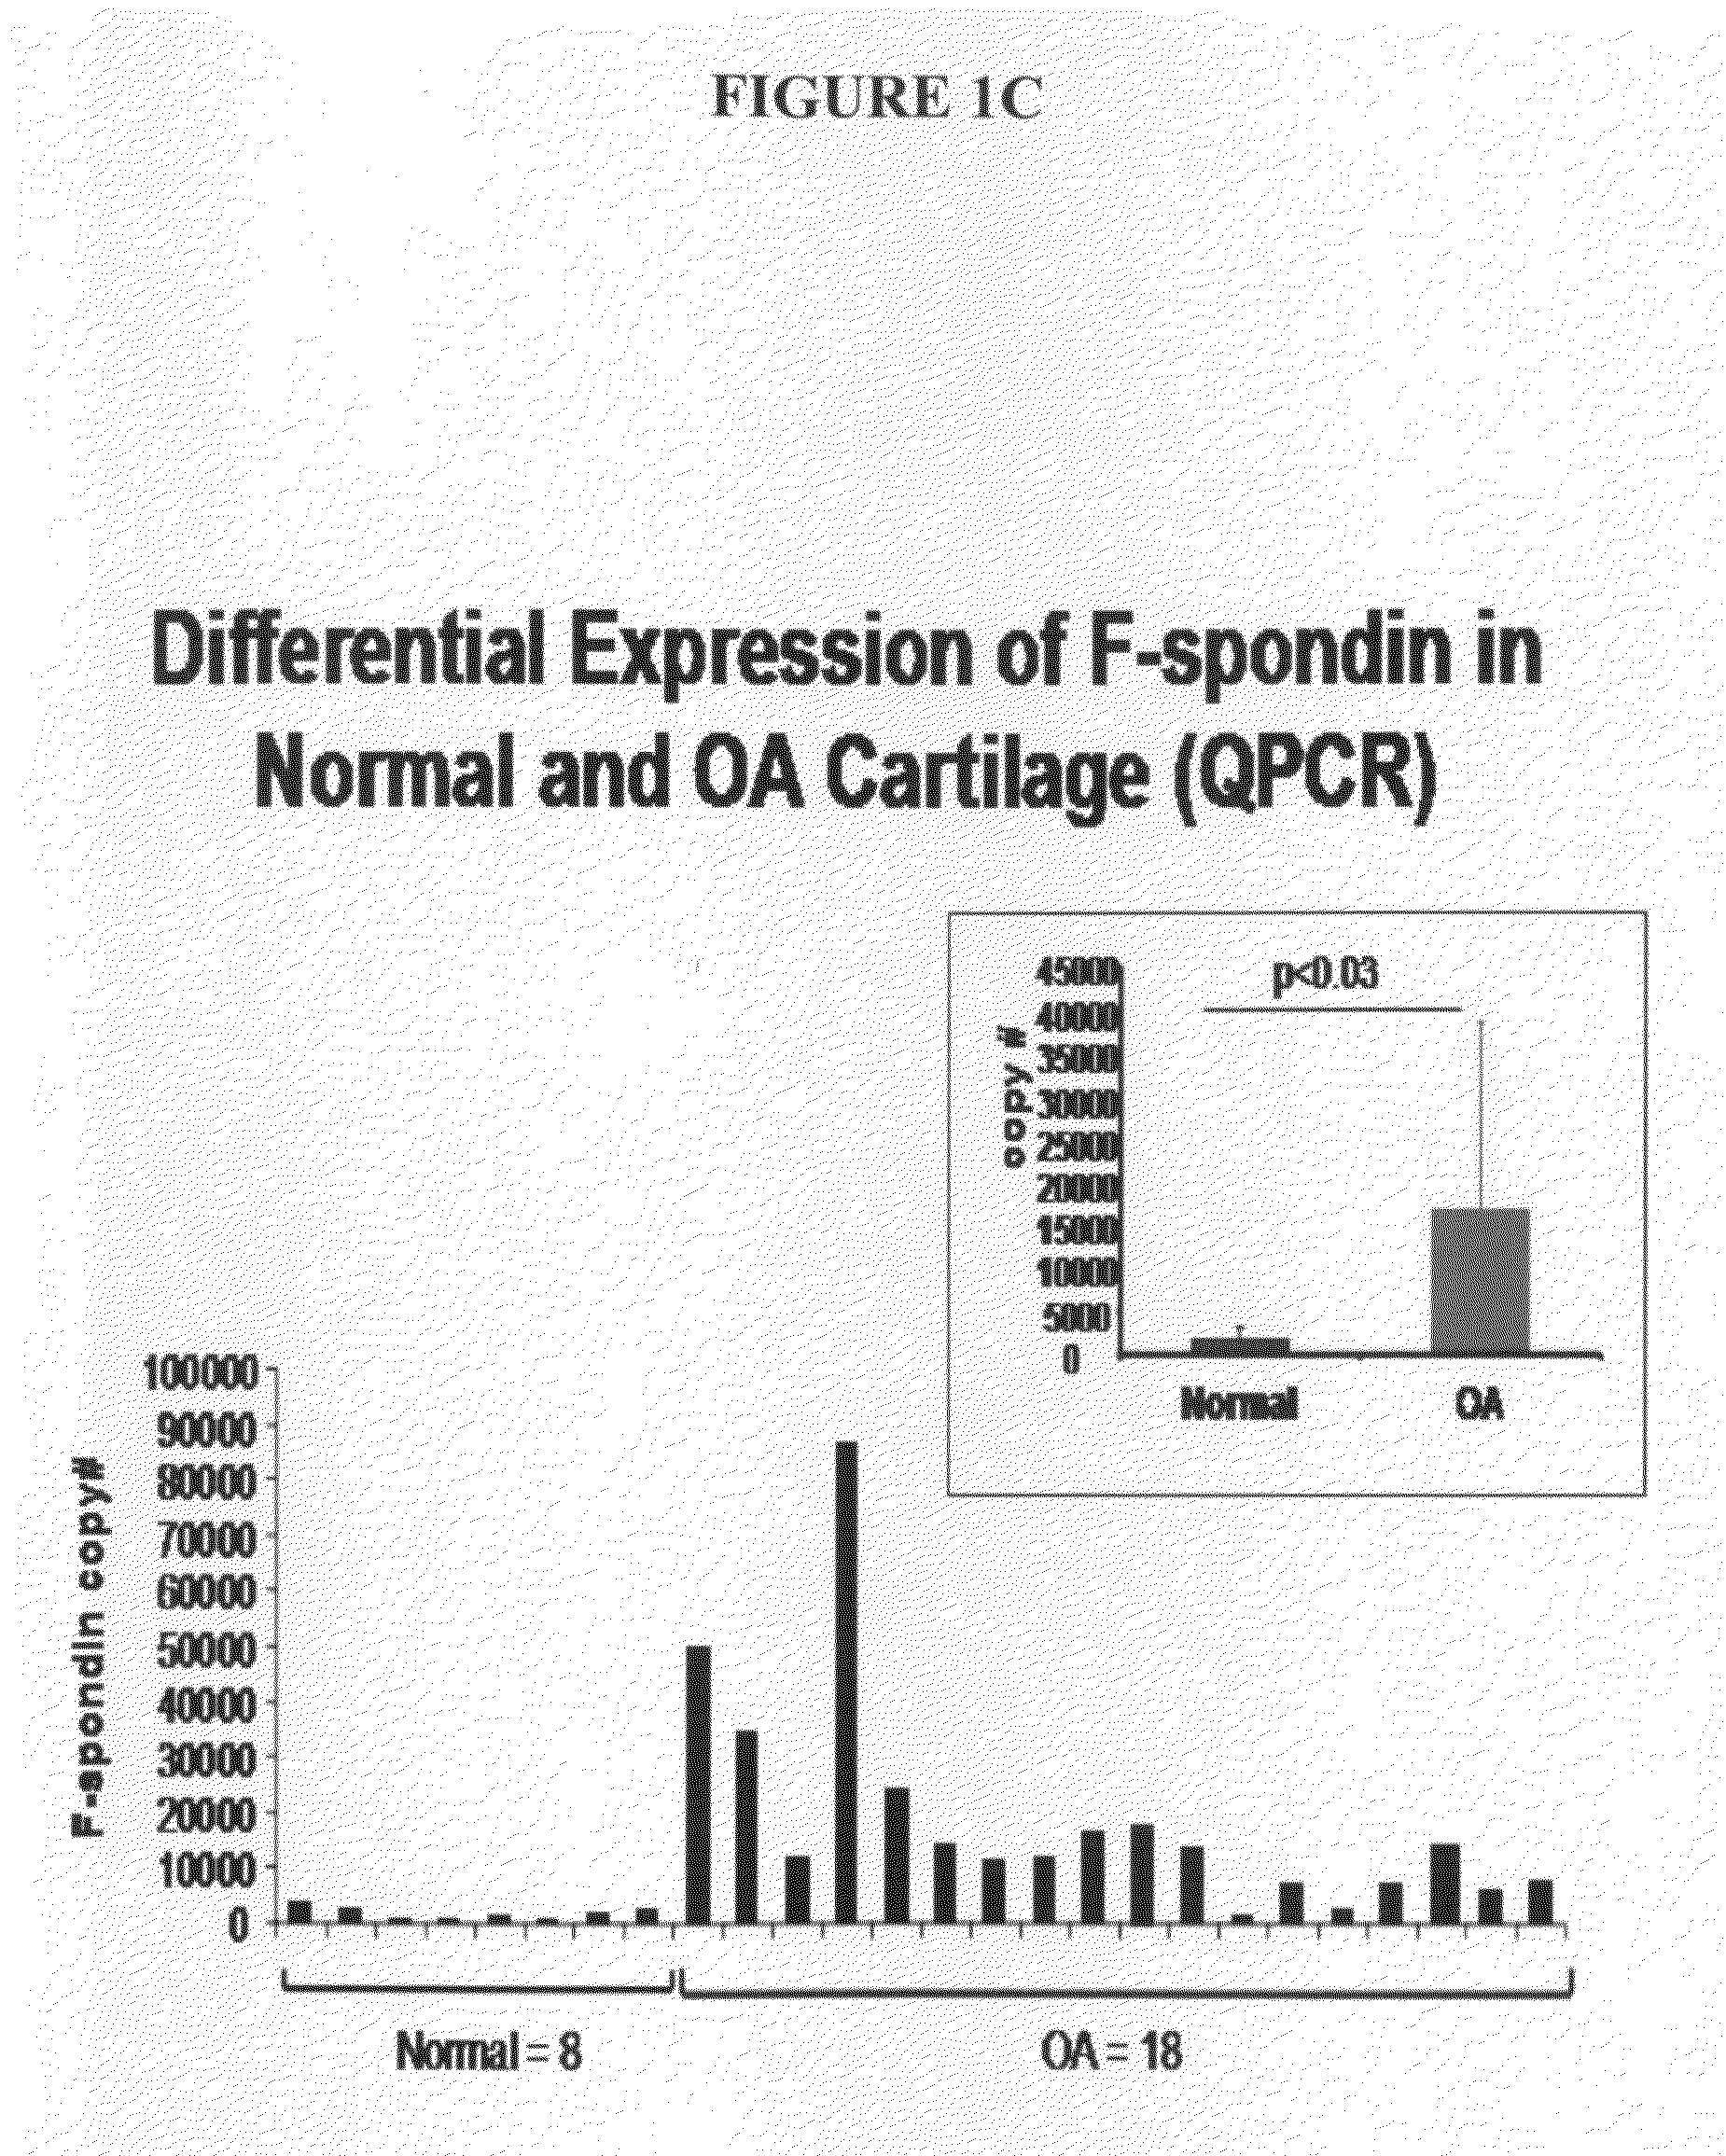 Methods of using F-spondin as a biomarker for cartilage degenerative conditions and bone diseases